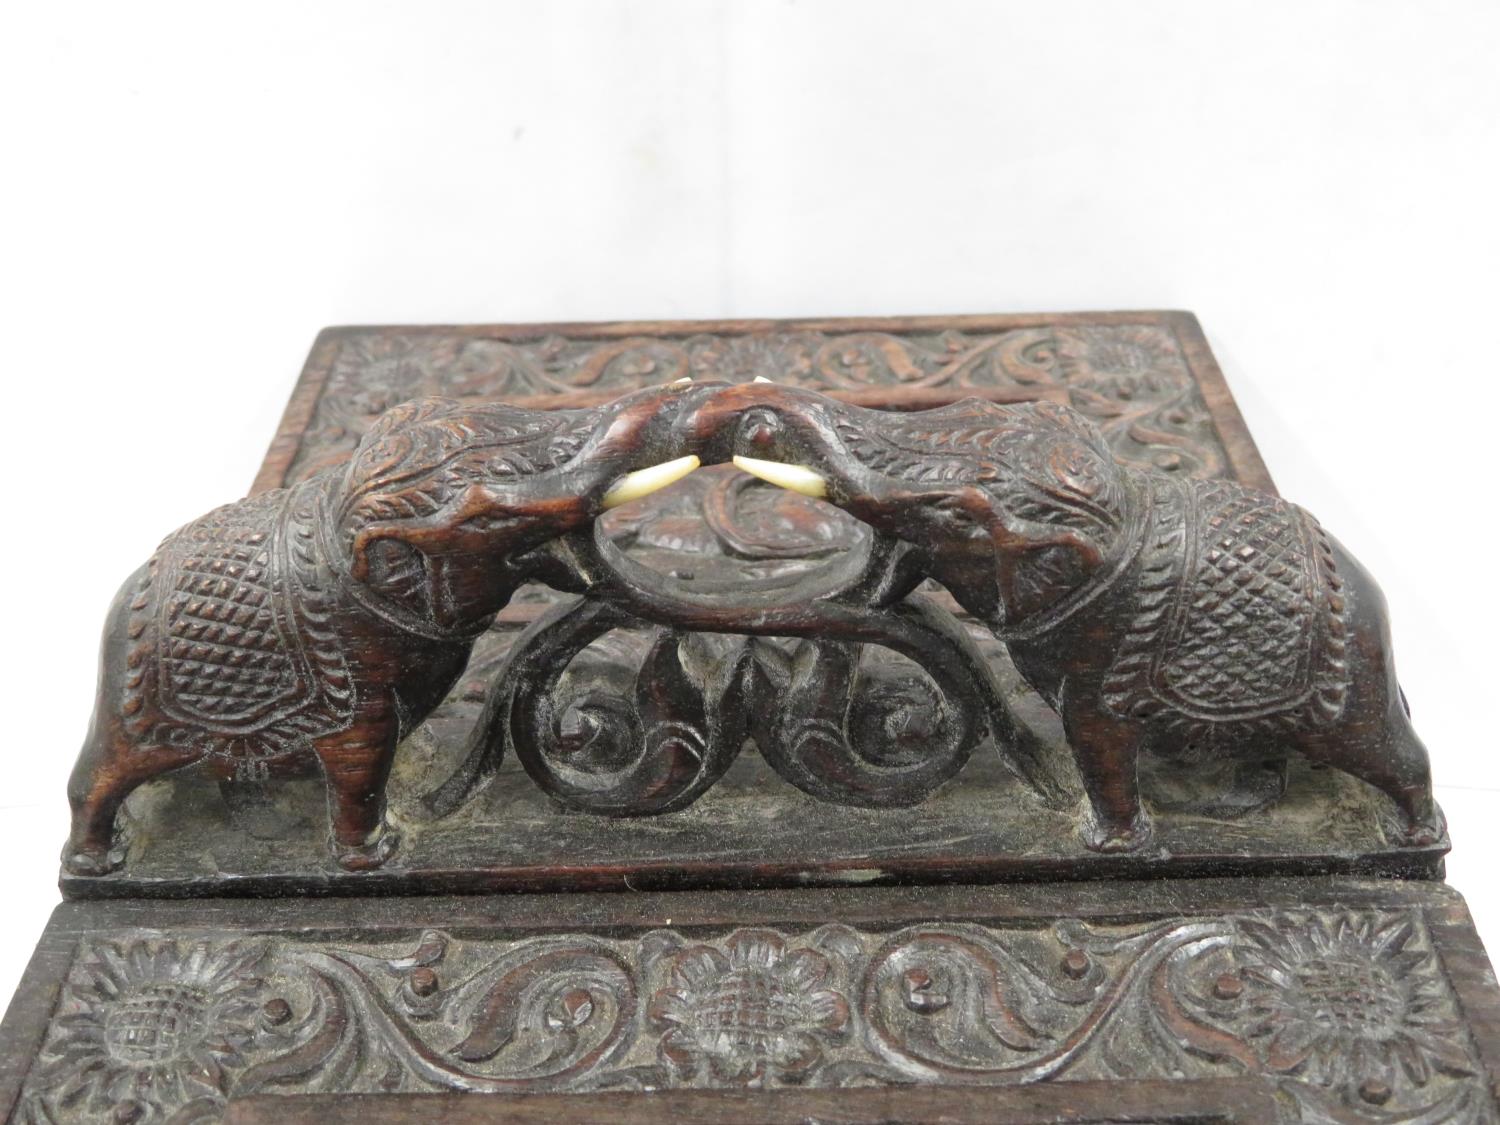 Highly carved Indian ebony box with elephants and carved ivory lion paw feet 12" x 6" x 7" - Image 7 of 8